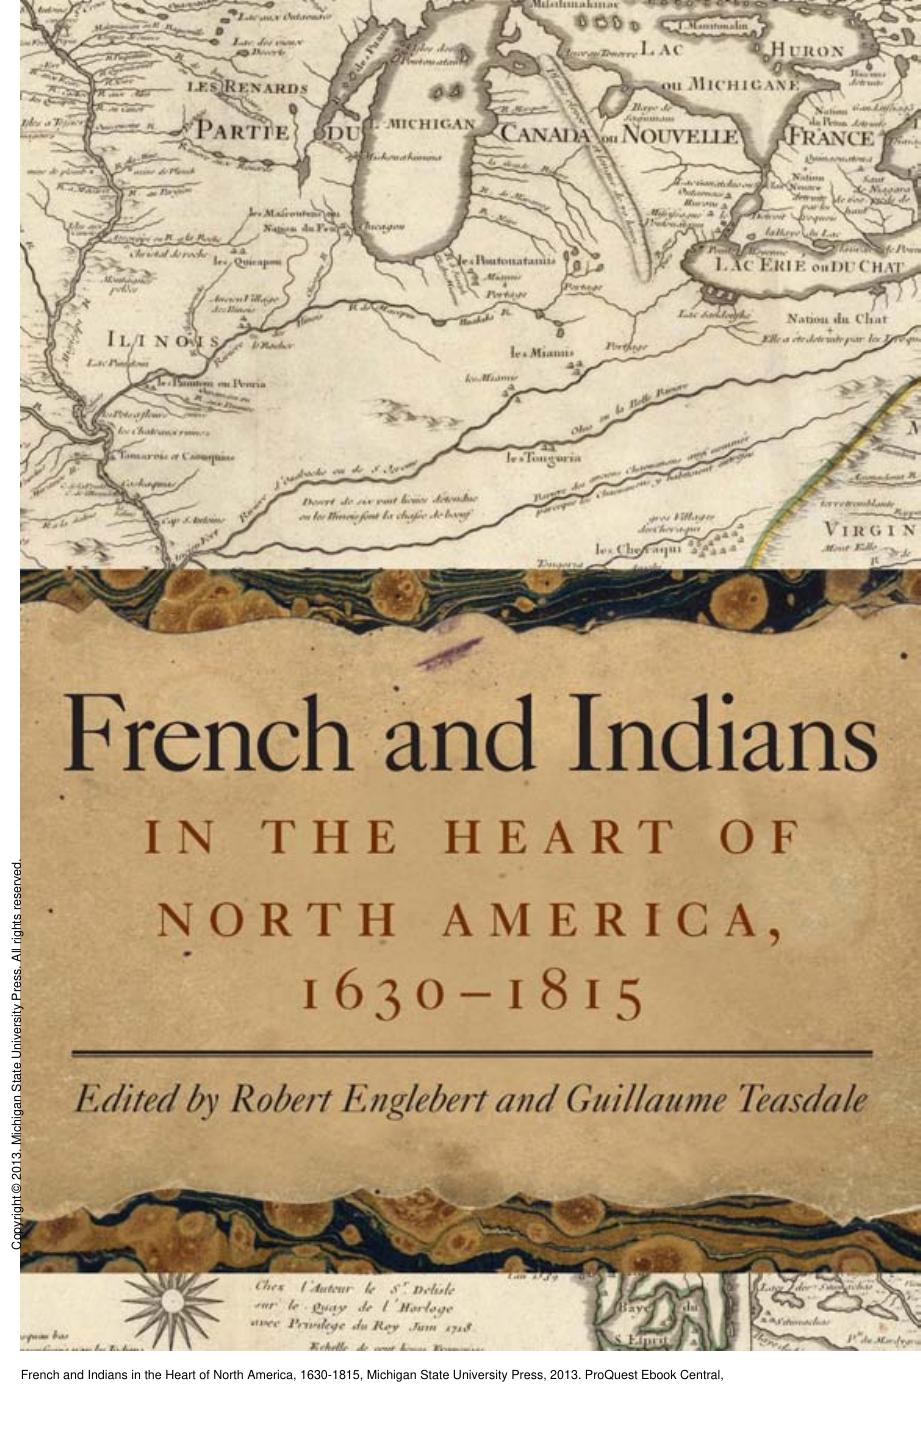 French and Indians in the Heart of North America, 1630-1815 by Robert Englebert; Guillaume Teasdale